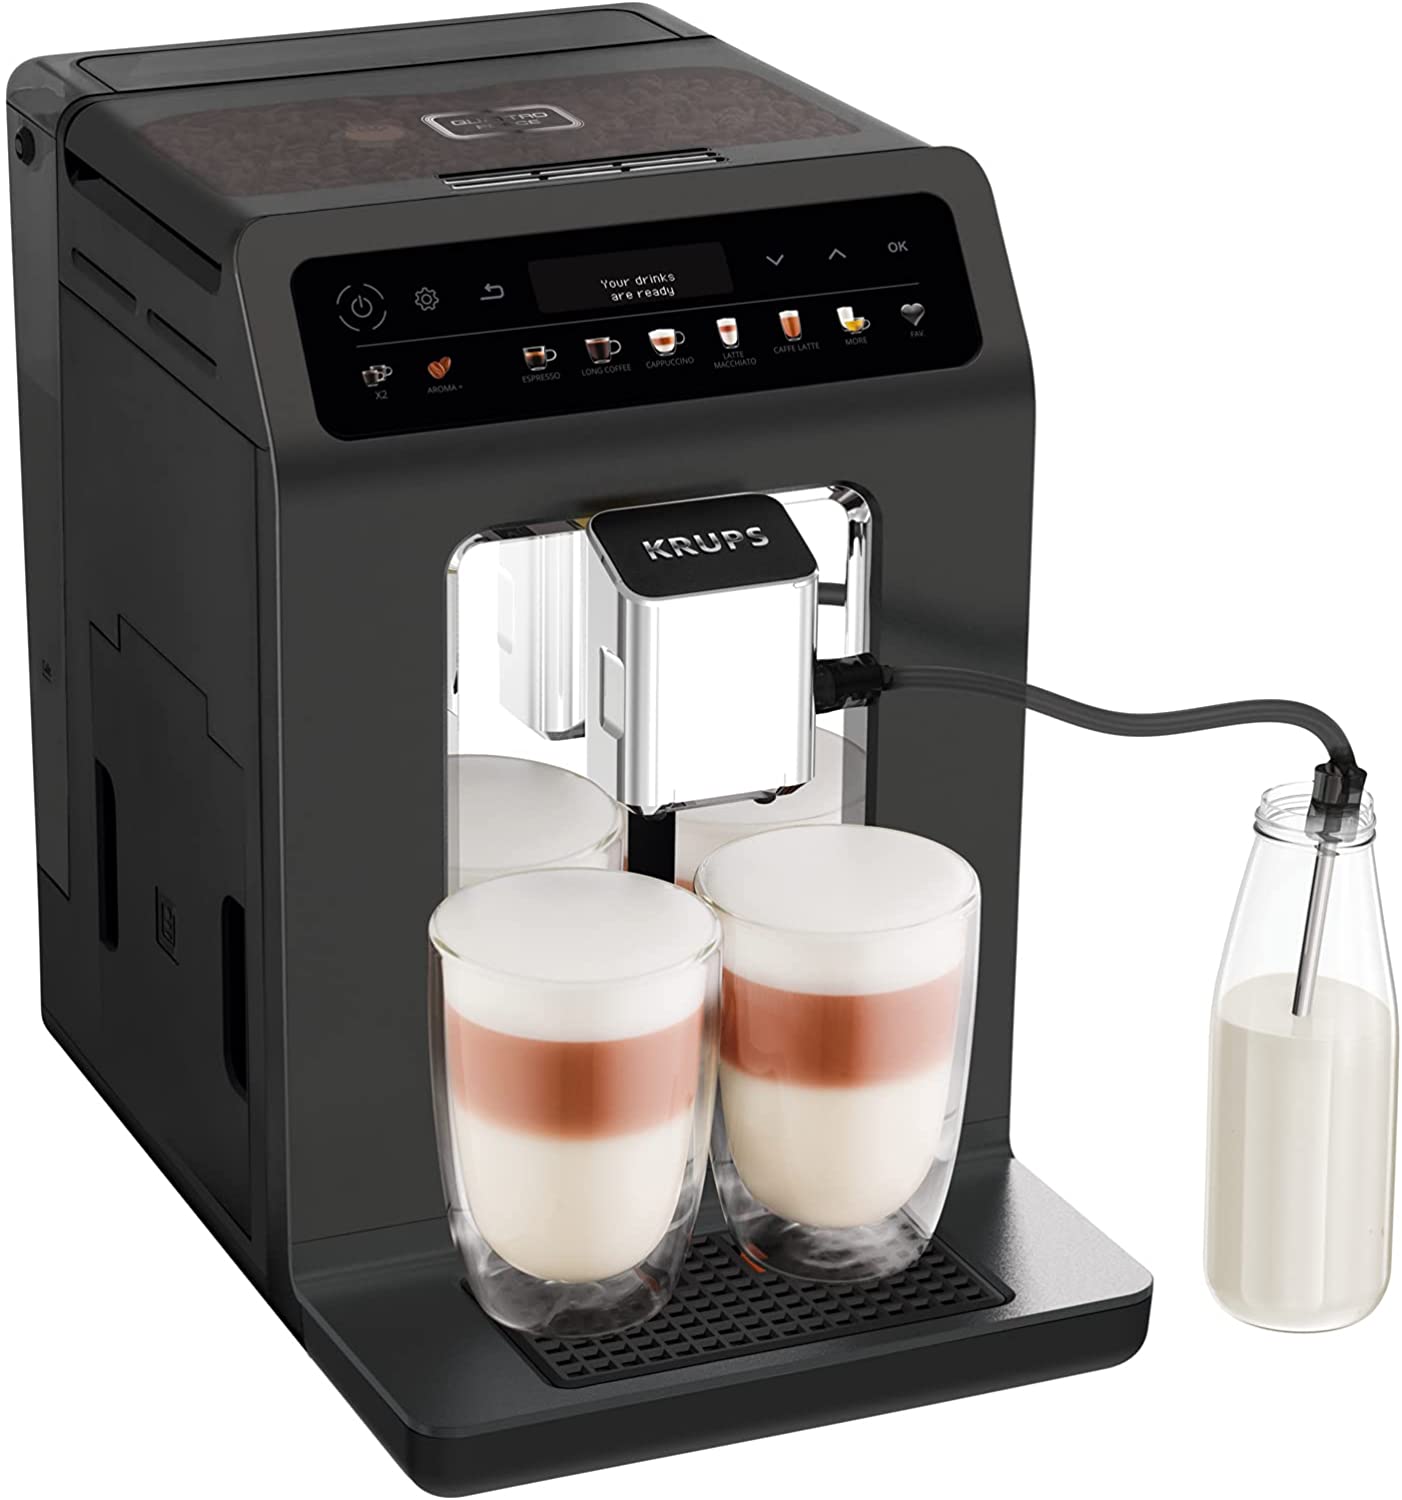 Krups EA895N Evidence One Fully Automatic Coffee Machine, One-Touch Cappuccino, Double Cup Function, 12 Drink Specialities, Colour Display, 2.3 L Water Tank, 1450 Watt, Meteor Graphite